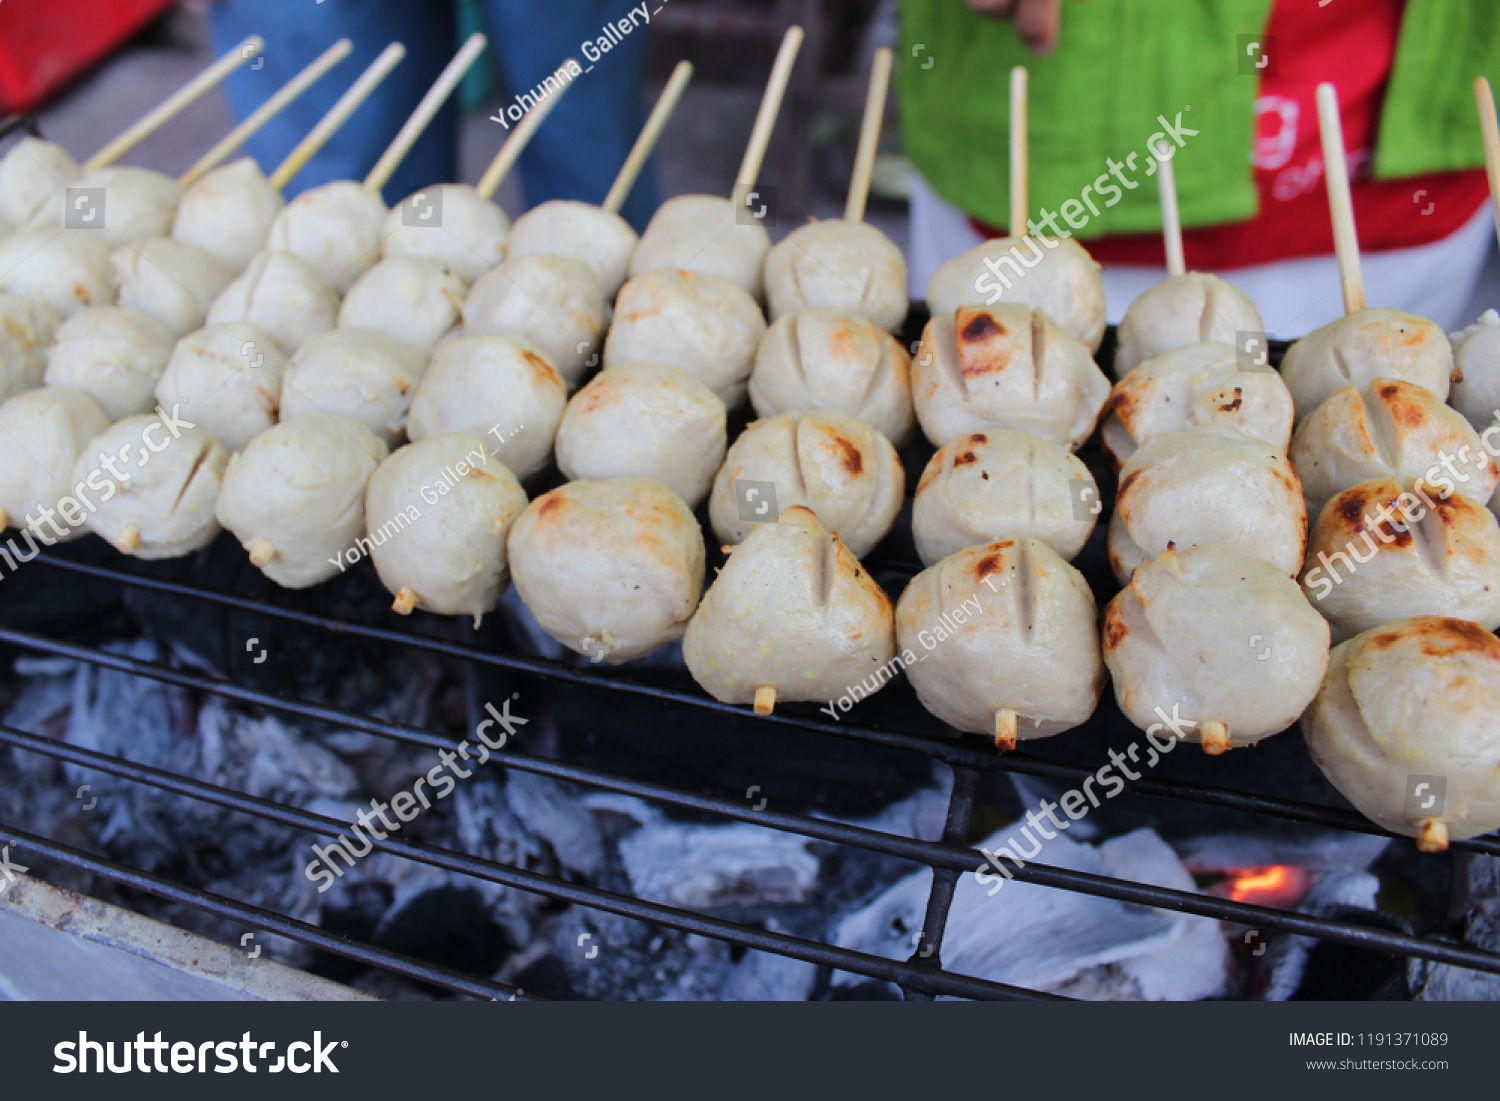 Look Chin Ping Pork Meatball Grilledthai Stock Photo Edit Now